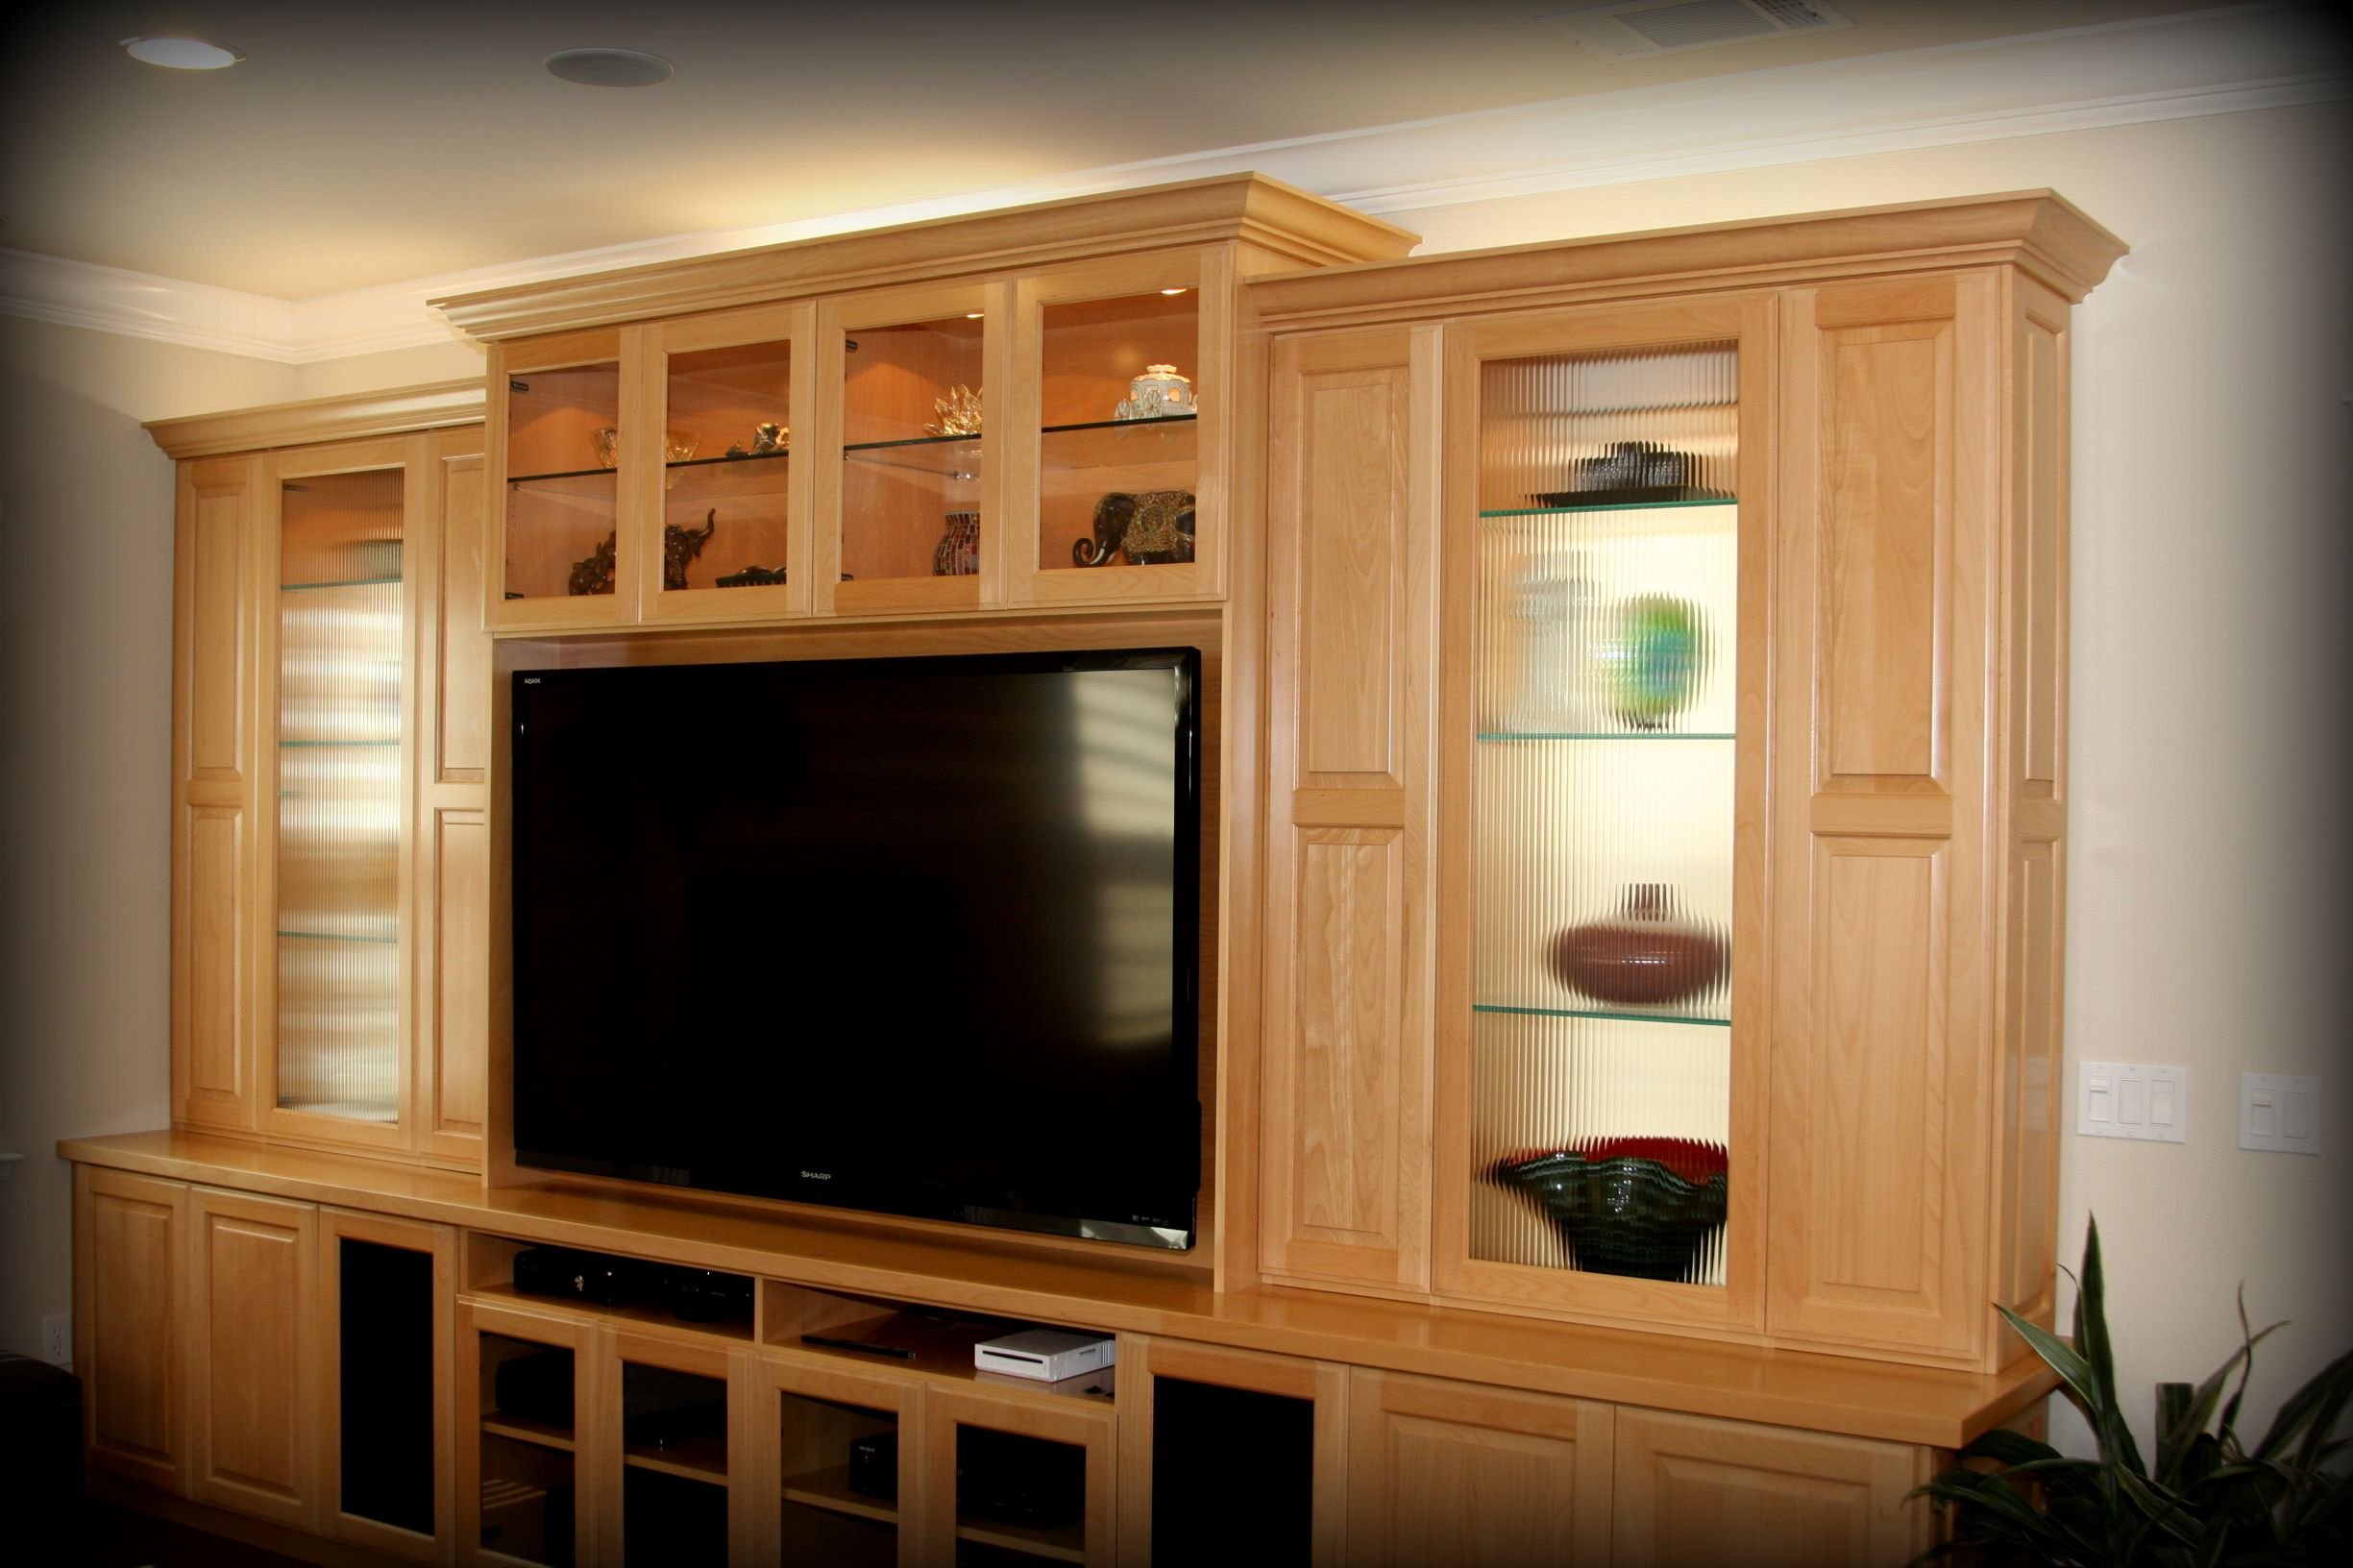 Clear Coat Steamed Beech Wood - Raised Panel Fronts